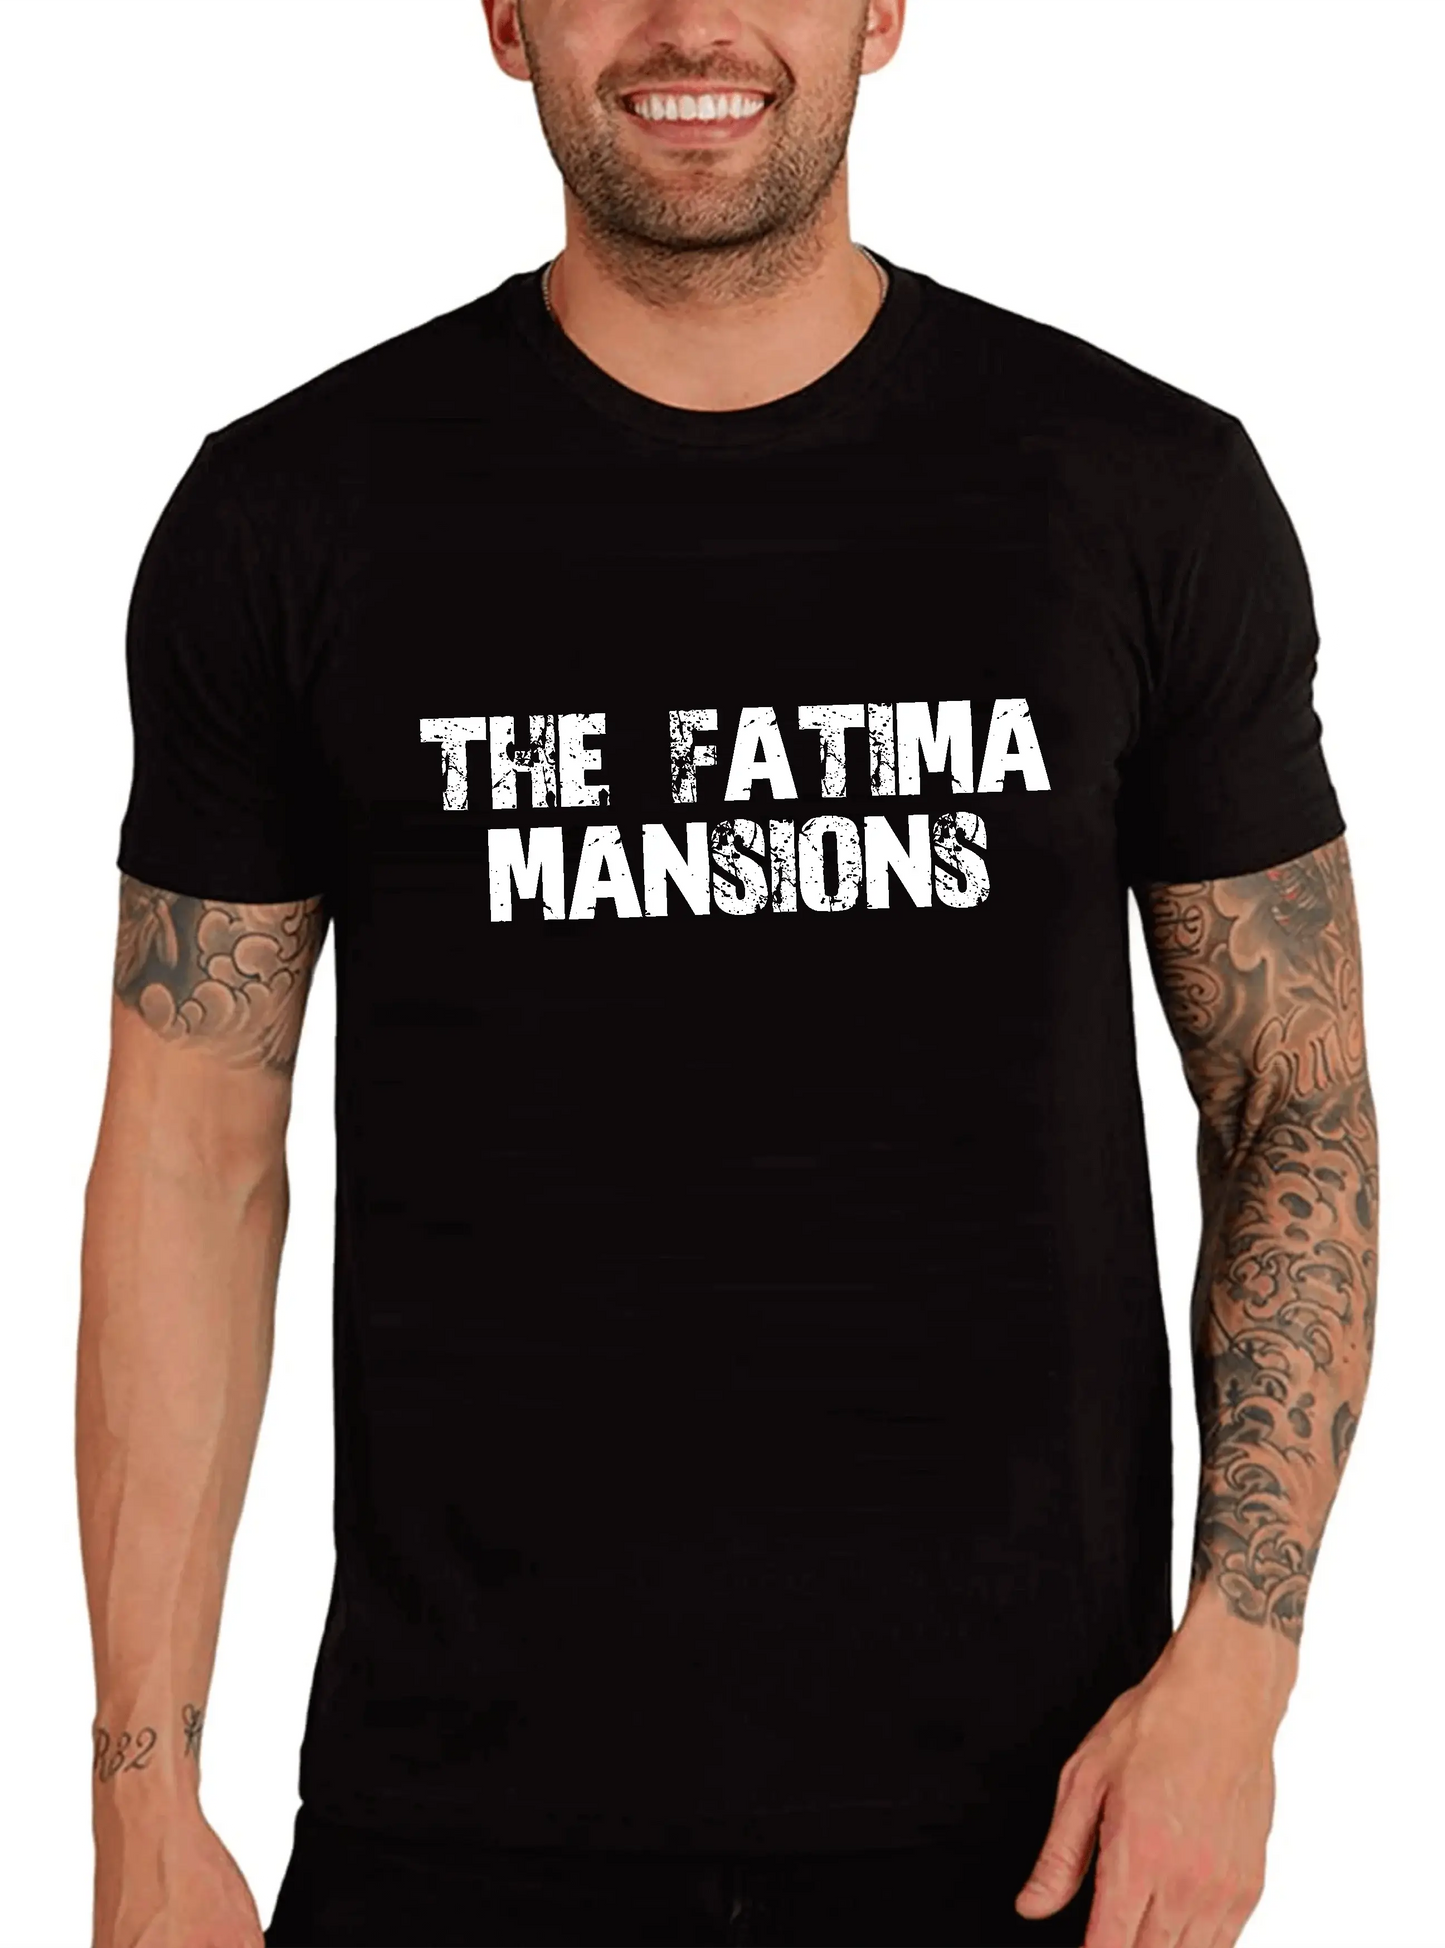 Men's Graphic T-Shirt The Fatima Mansions Eco-Friendly Limited Edition Short Sleeve Tee-Shirt Vintage Birthday Gift Novelty